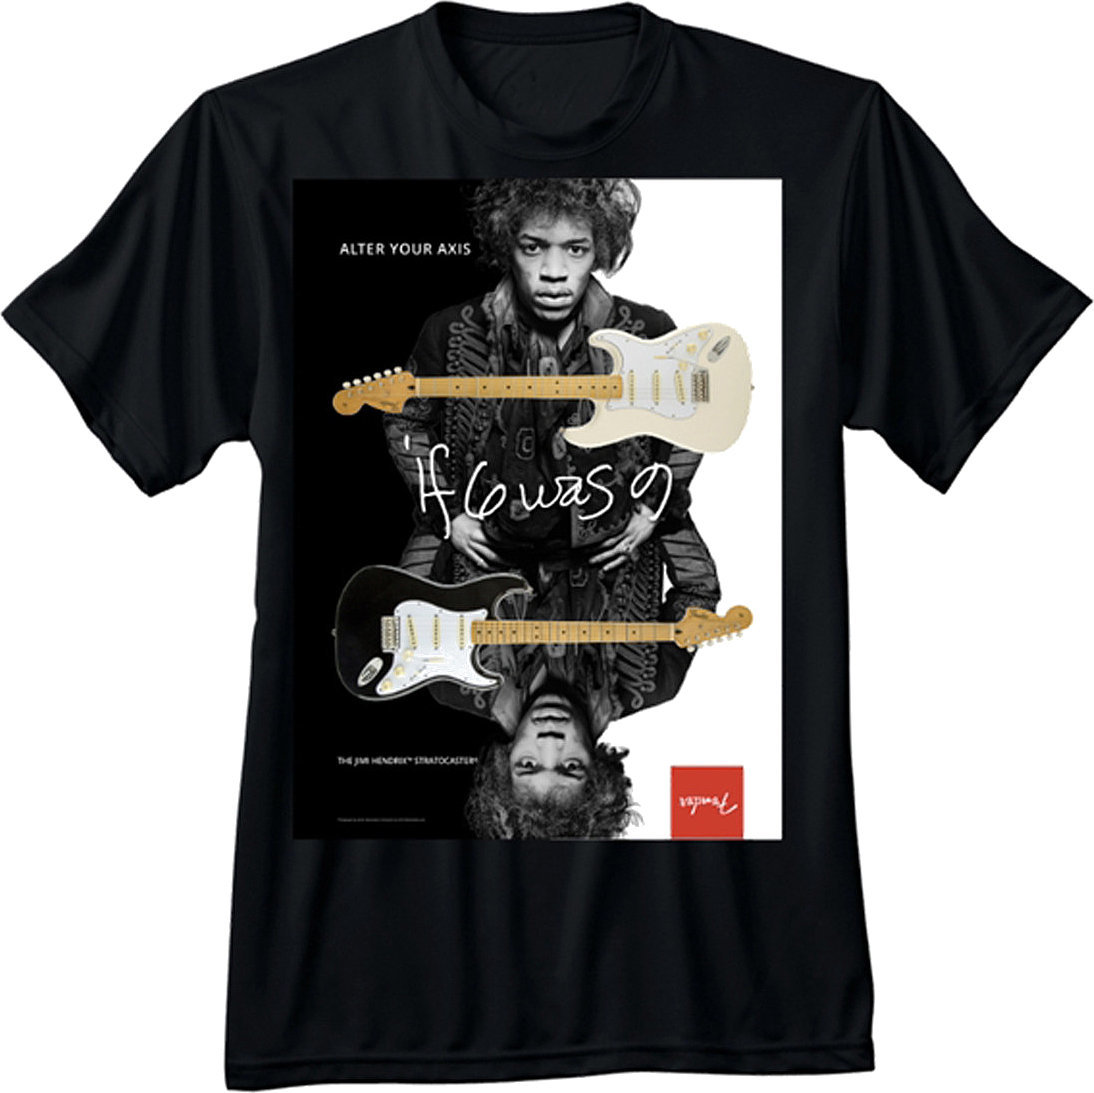 Paita Fender Jimi Hendrix Collection Alter Your Axis T-Shirt Black M